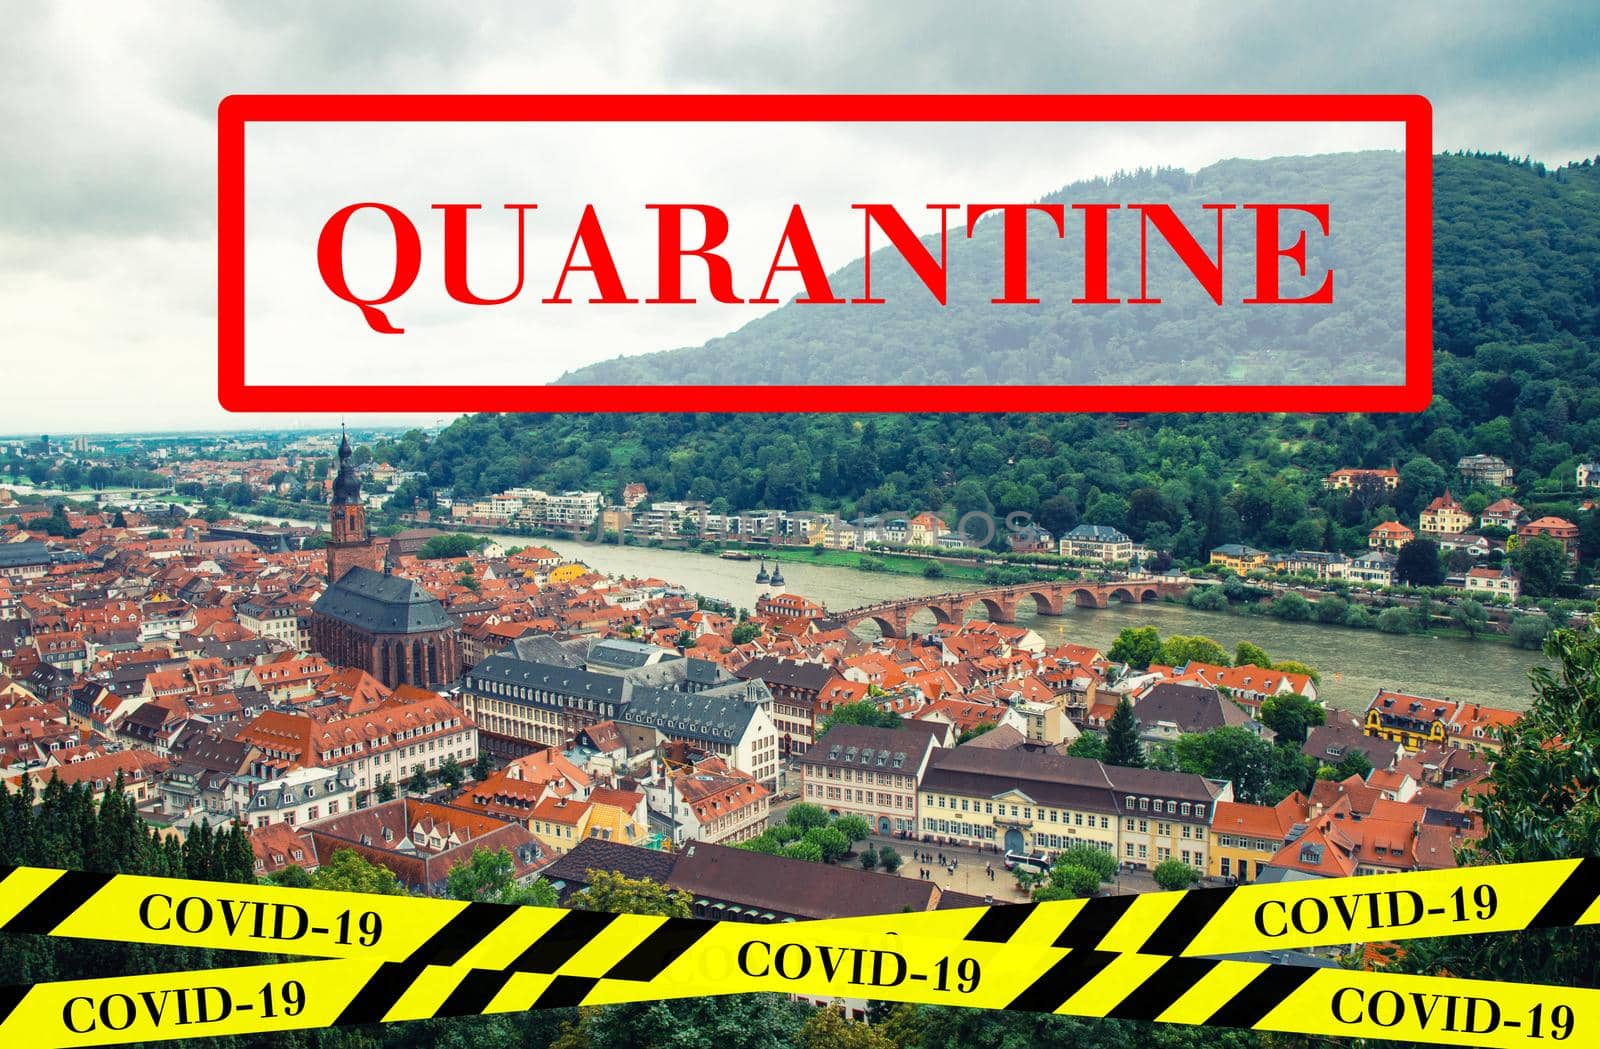 Quarantine in Germany. Panoramic view of medieval town Heidelberg. No travel and lockdown concept. Coronavirus outbreak Covid-19 pandemic concept. Canceled tourist vacation. Barrier tape.